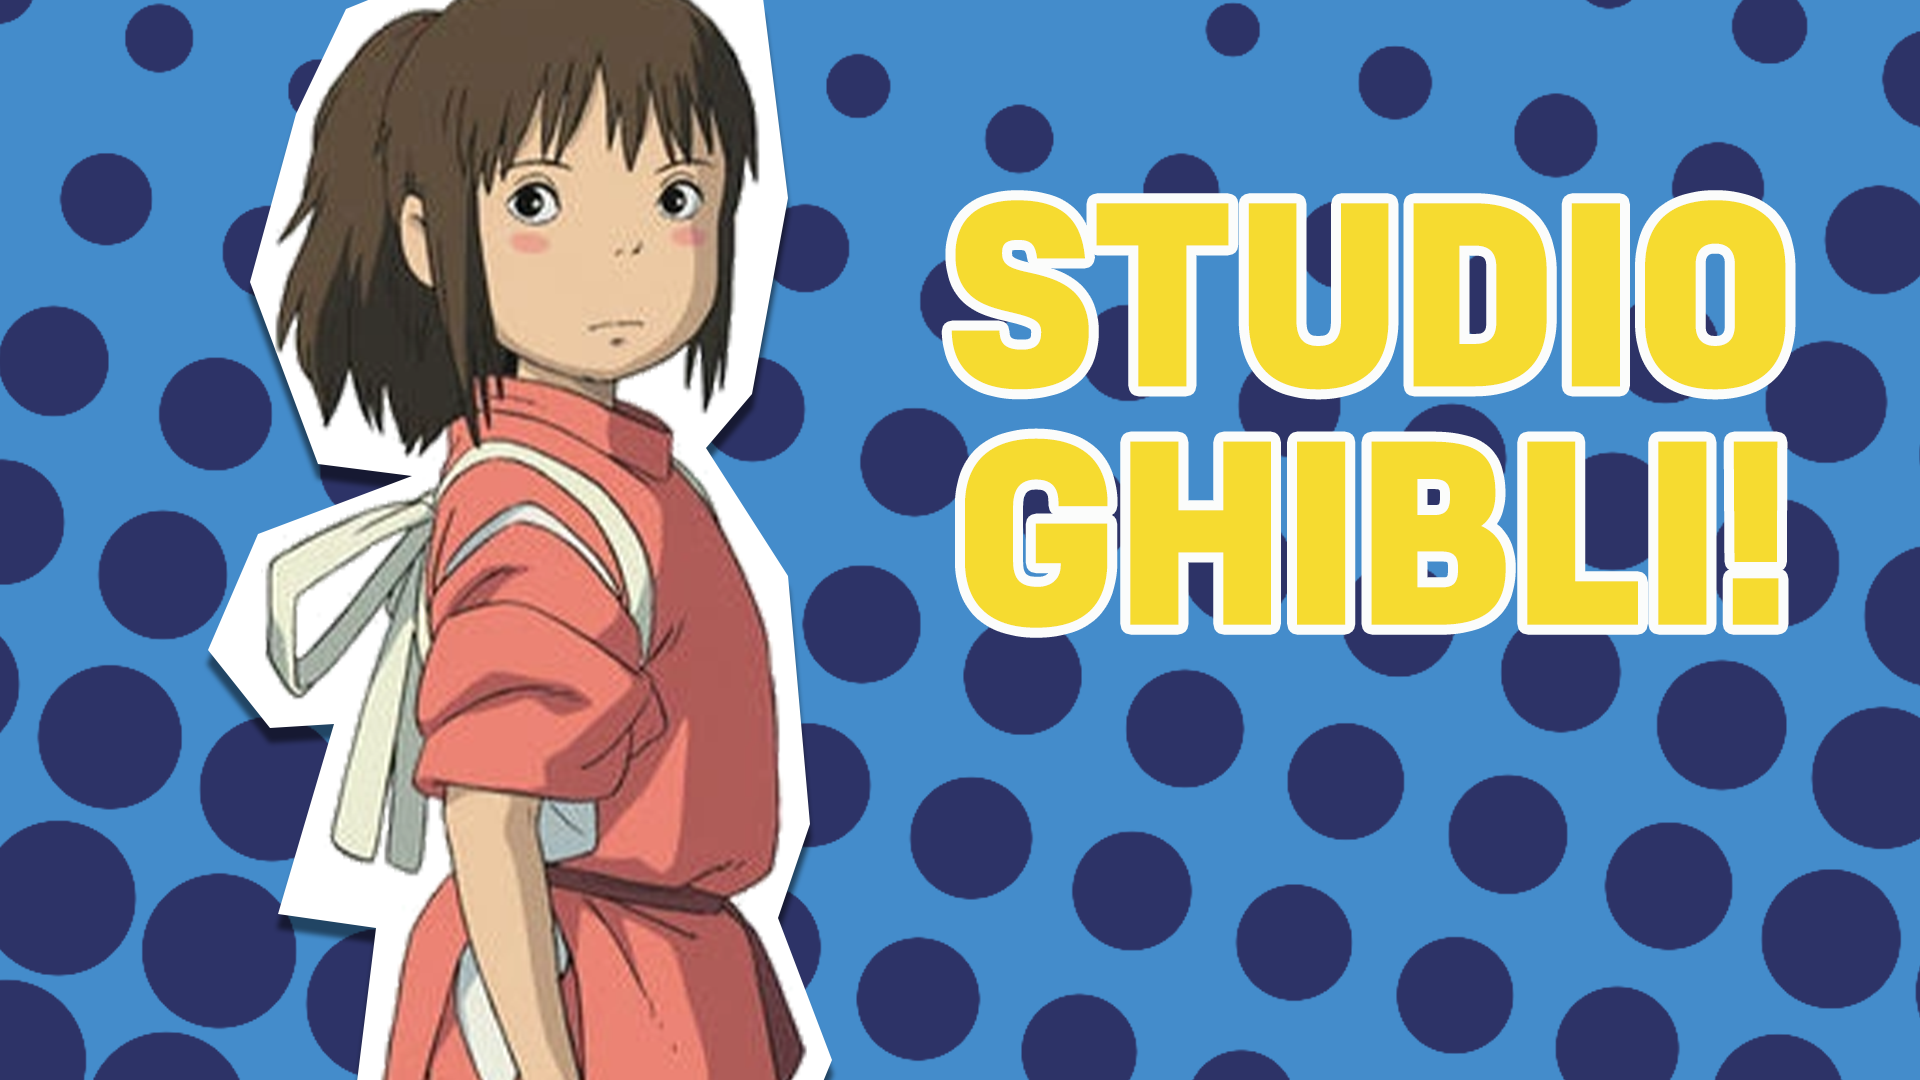 You should definitely watch something from studio Ghibli! You're in the mood for something magical, meaningful and beautiful, and Studio Ghibli is the perfect choice! Maybe you fancy Spirited Away? Or Howl's Movie Castle? There are loads of great movies to choose from!